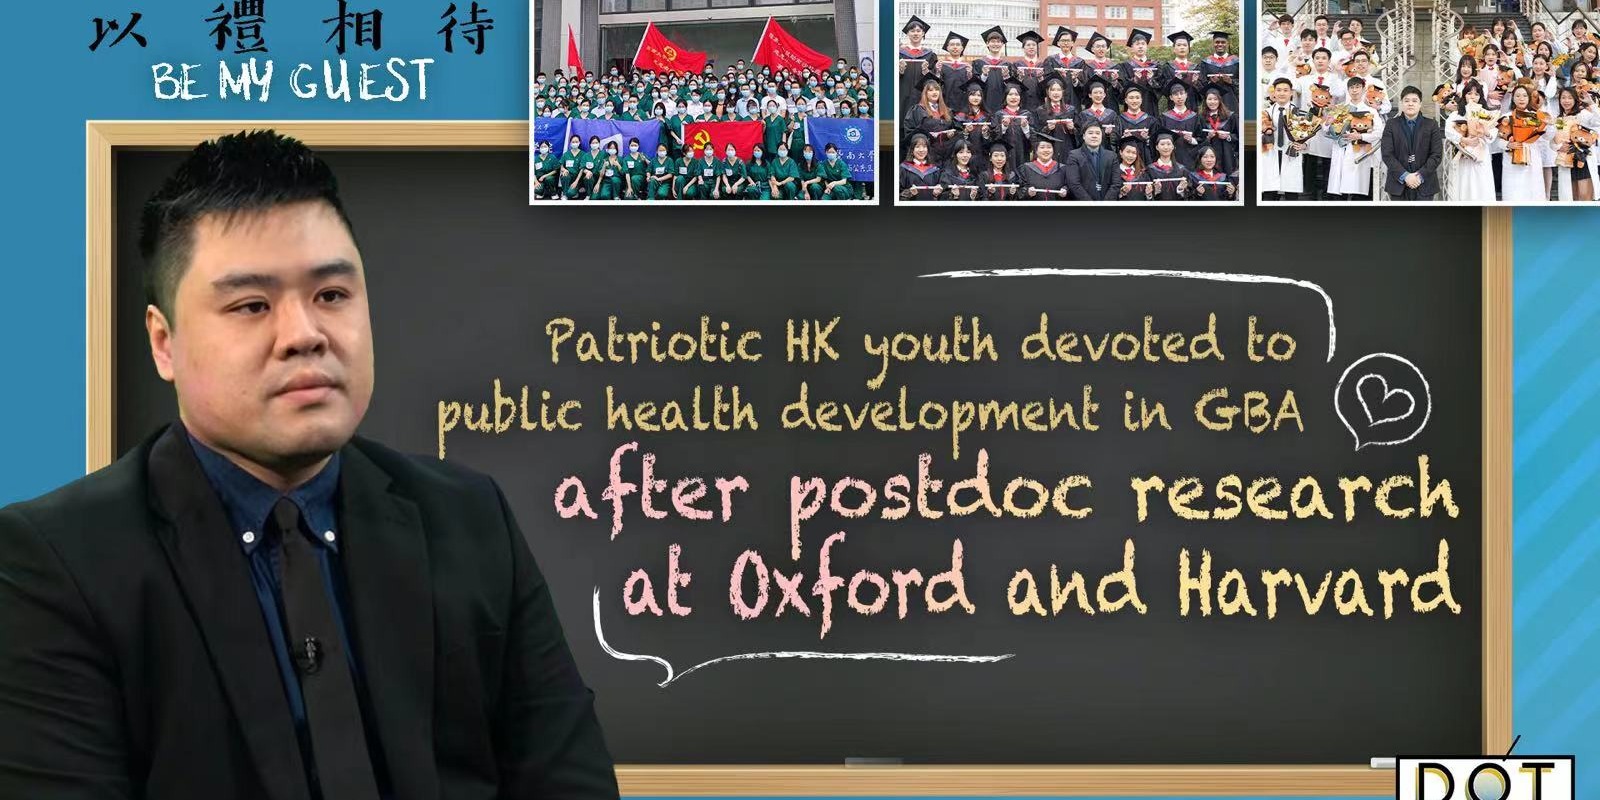 Be My Guest | Patriotic HK youth devoted to public health development in GBA after postdoc research at Oxford & Harvard